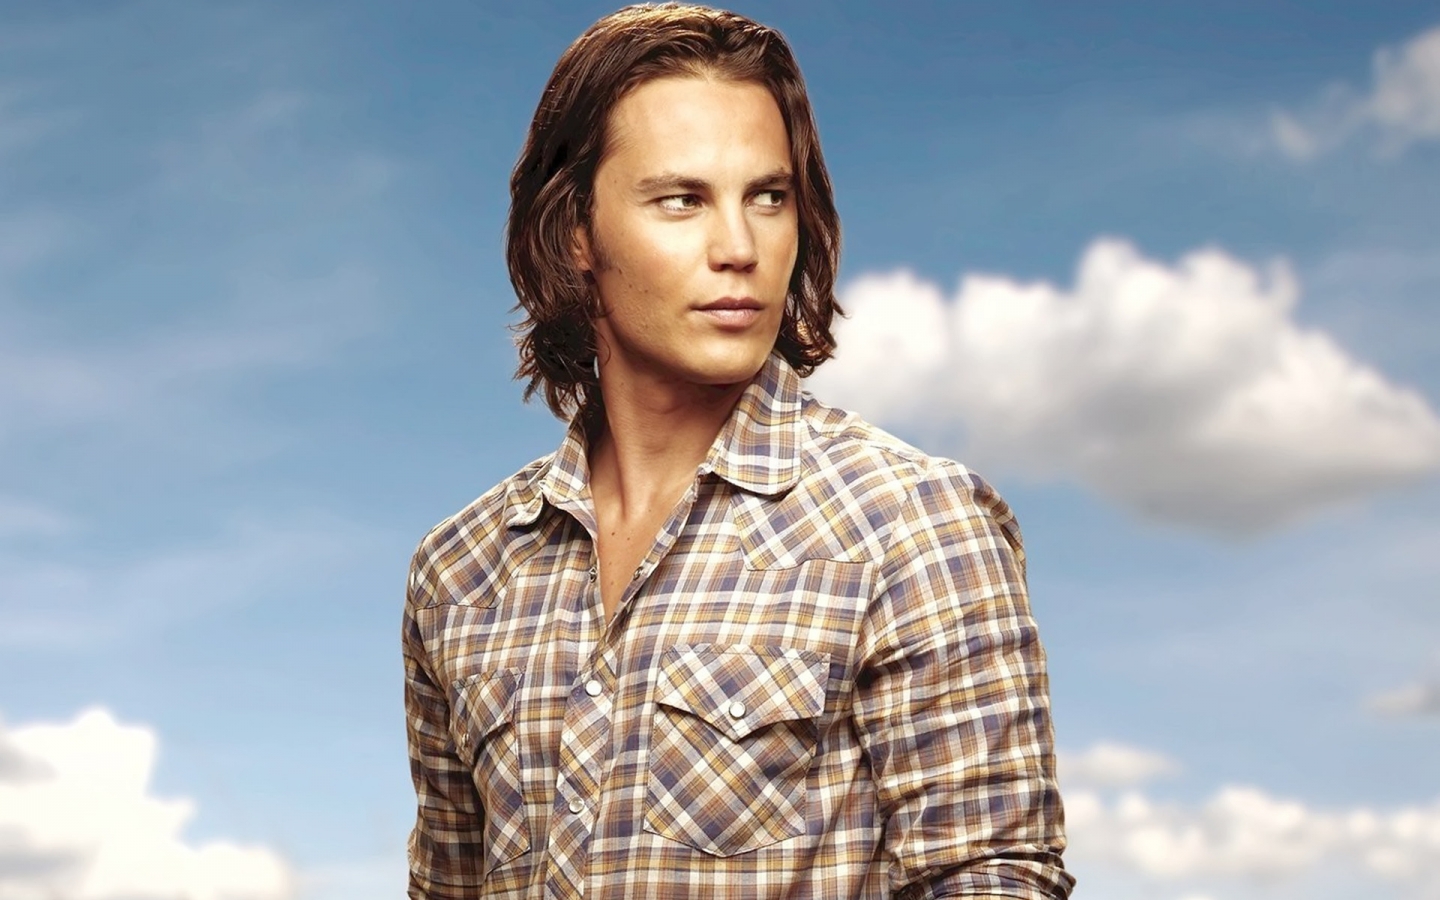 Cool Taylor Kitsch for 1440 x 900 widescreen resolution